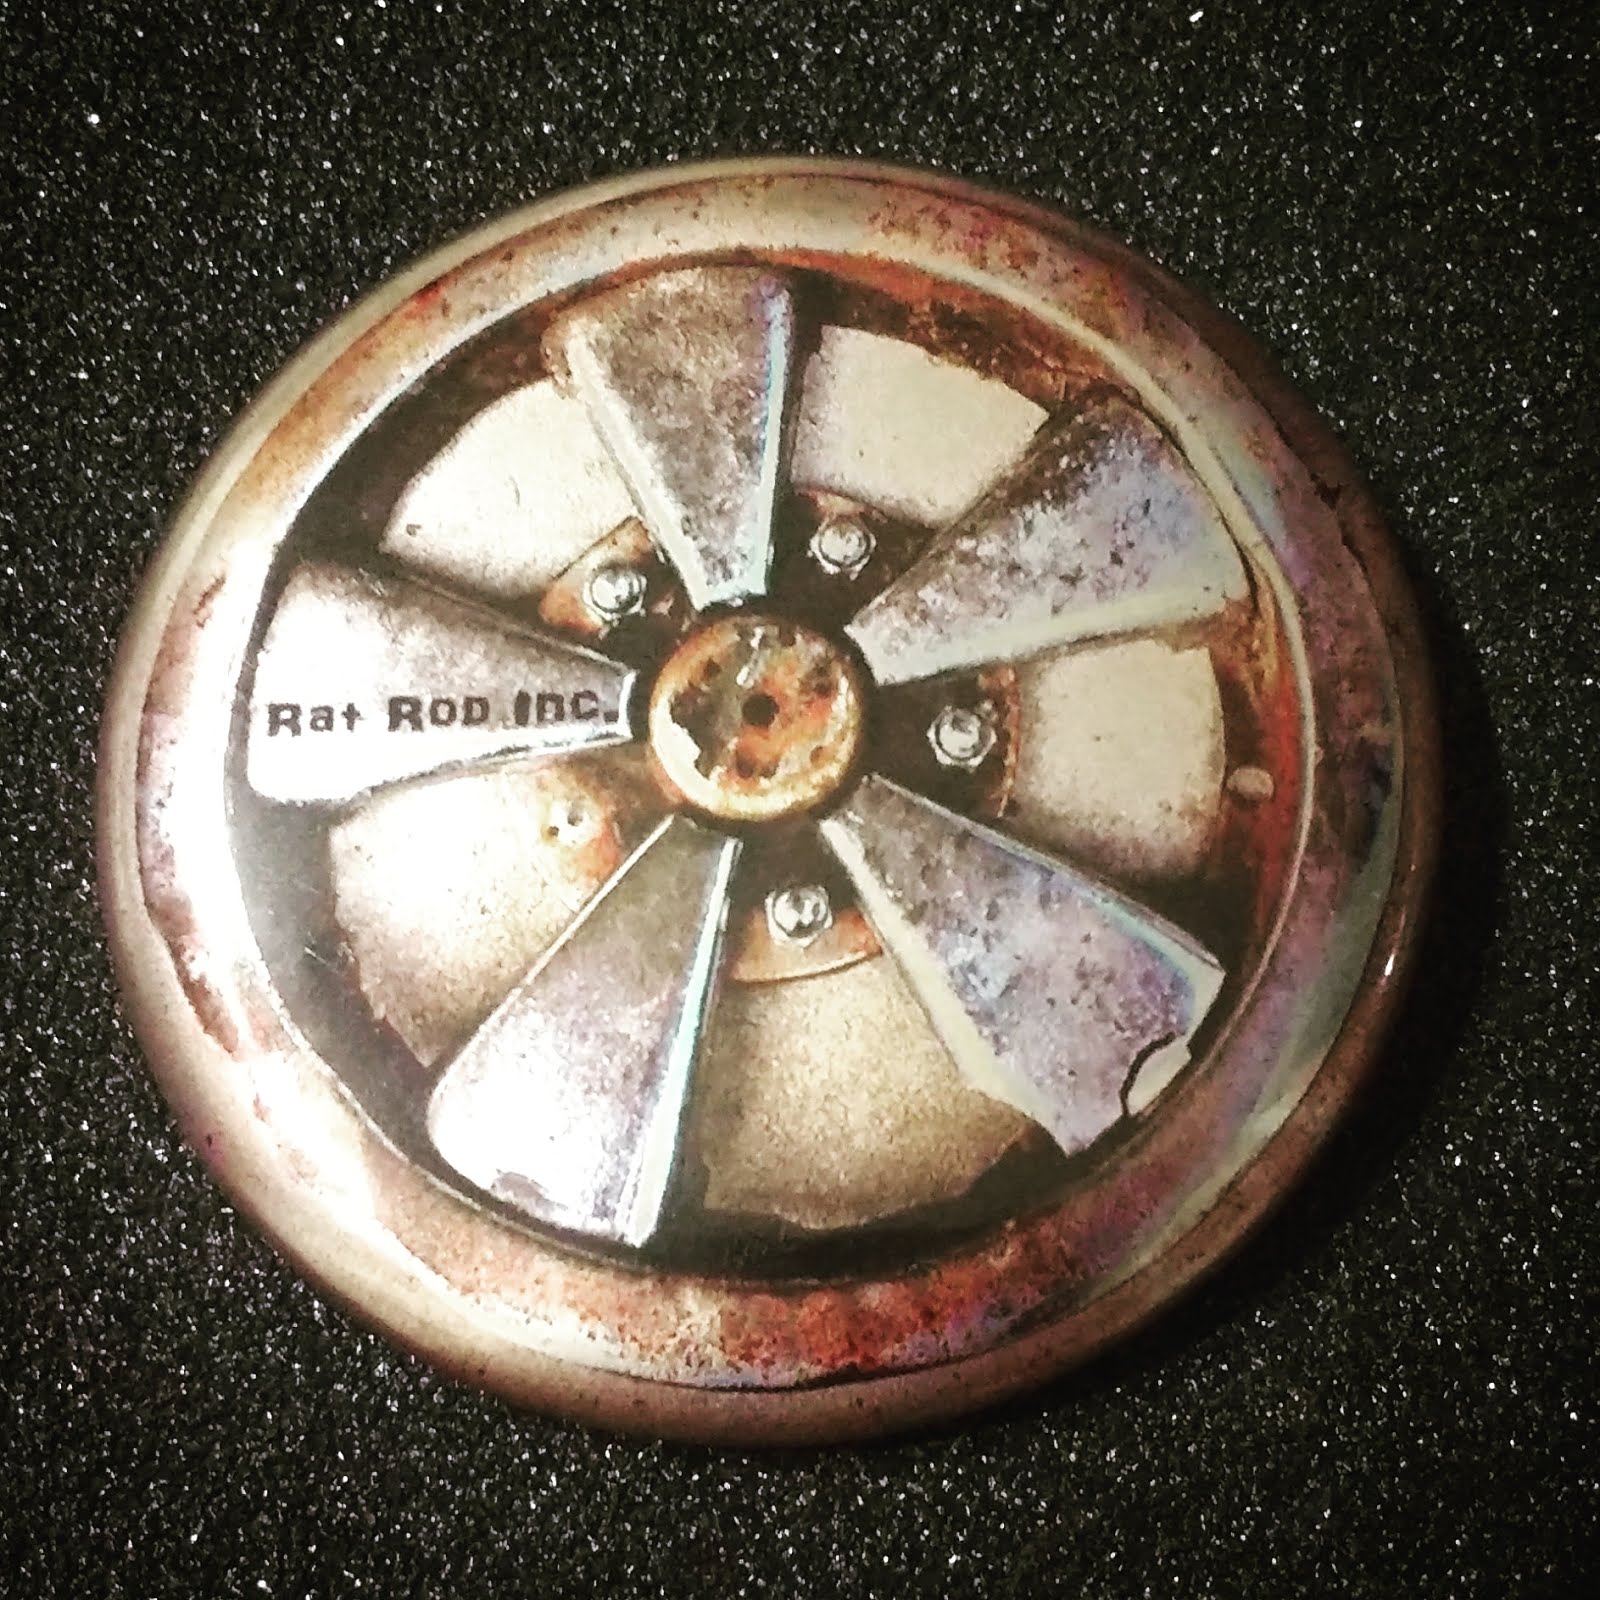 Click here to buy your Rat Rod Inc. pinback buttons.